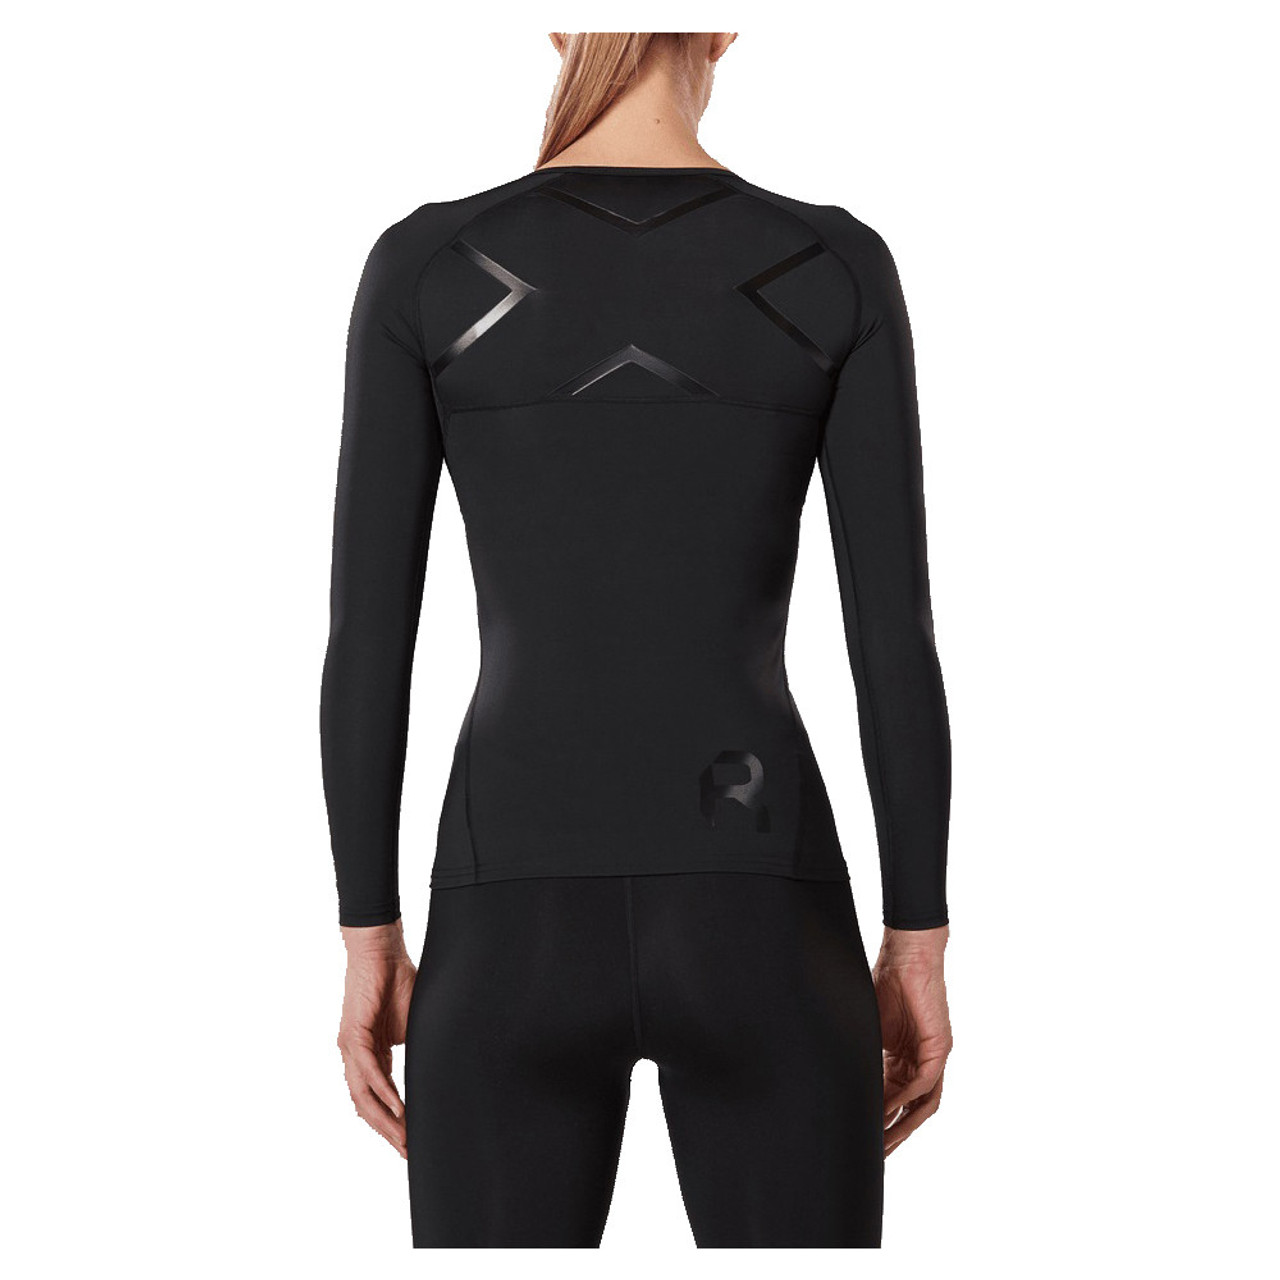 2XU Women's Refresh Recovery Long Sleeve Compression Top